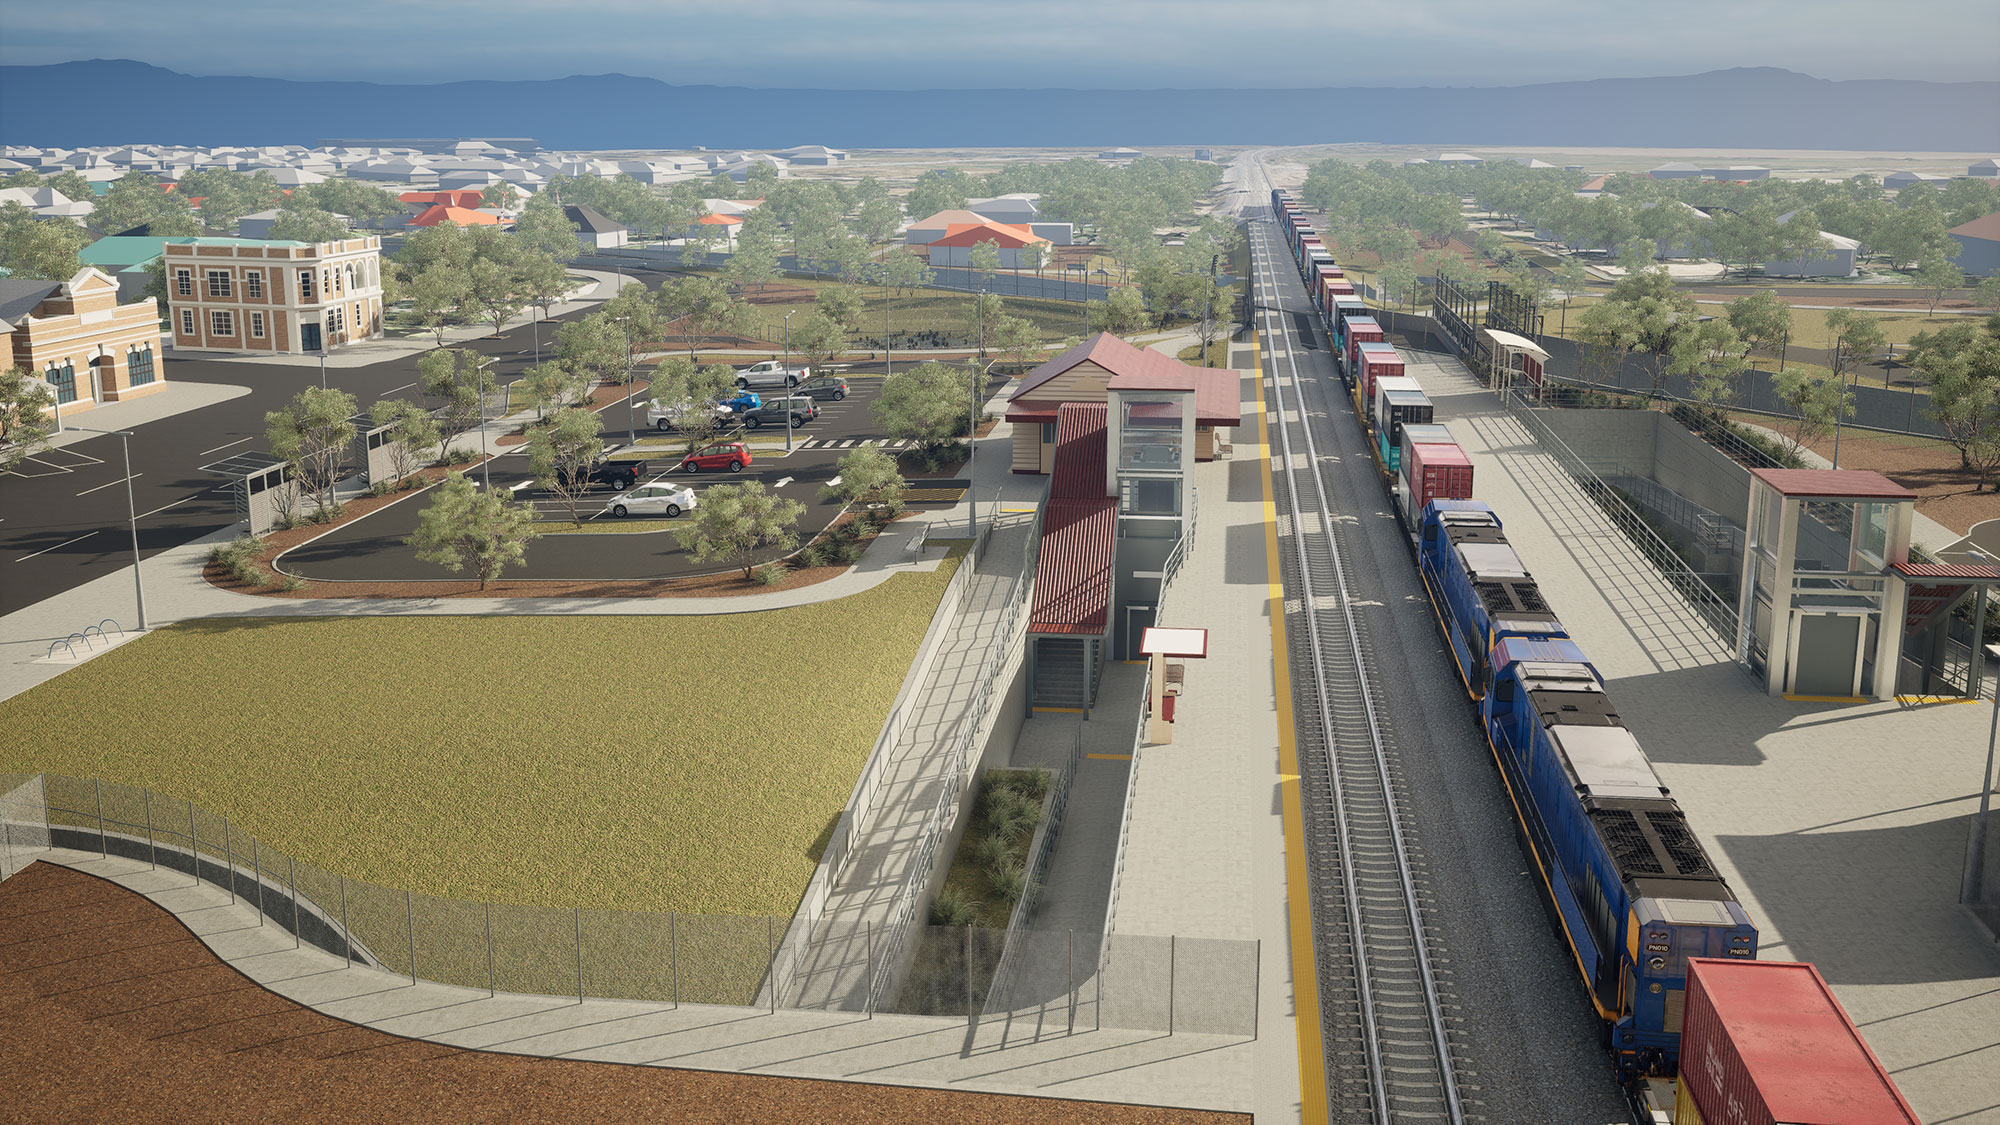 Visualisation showing the new station forecourt, underpass and relocated track